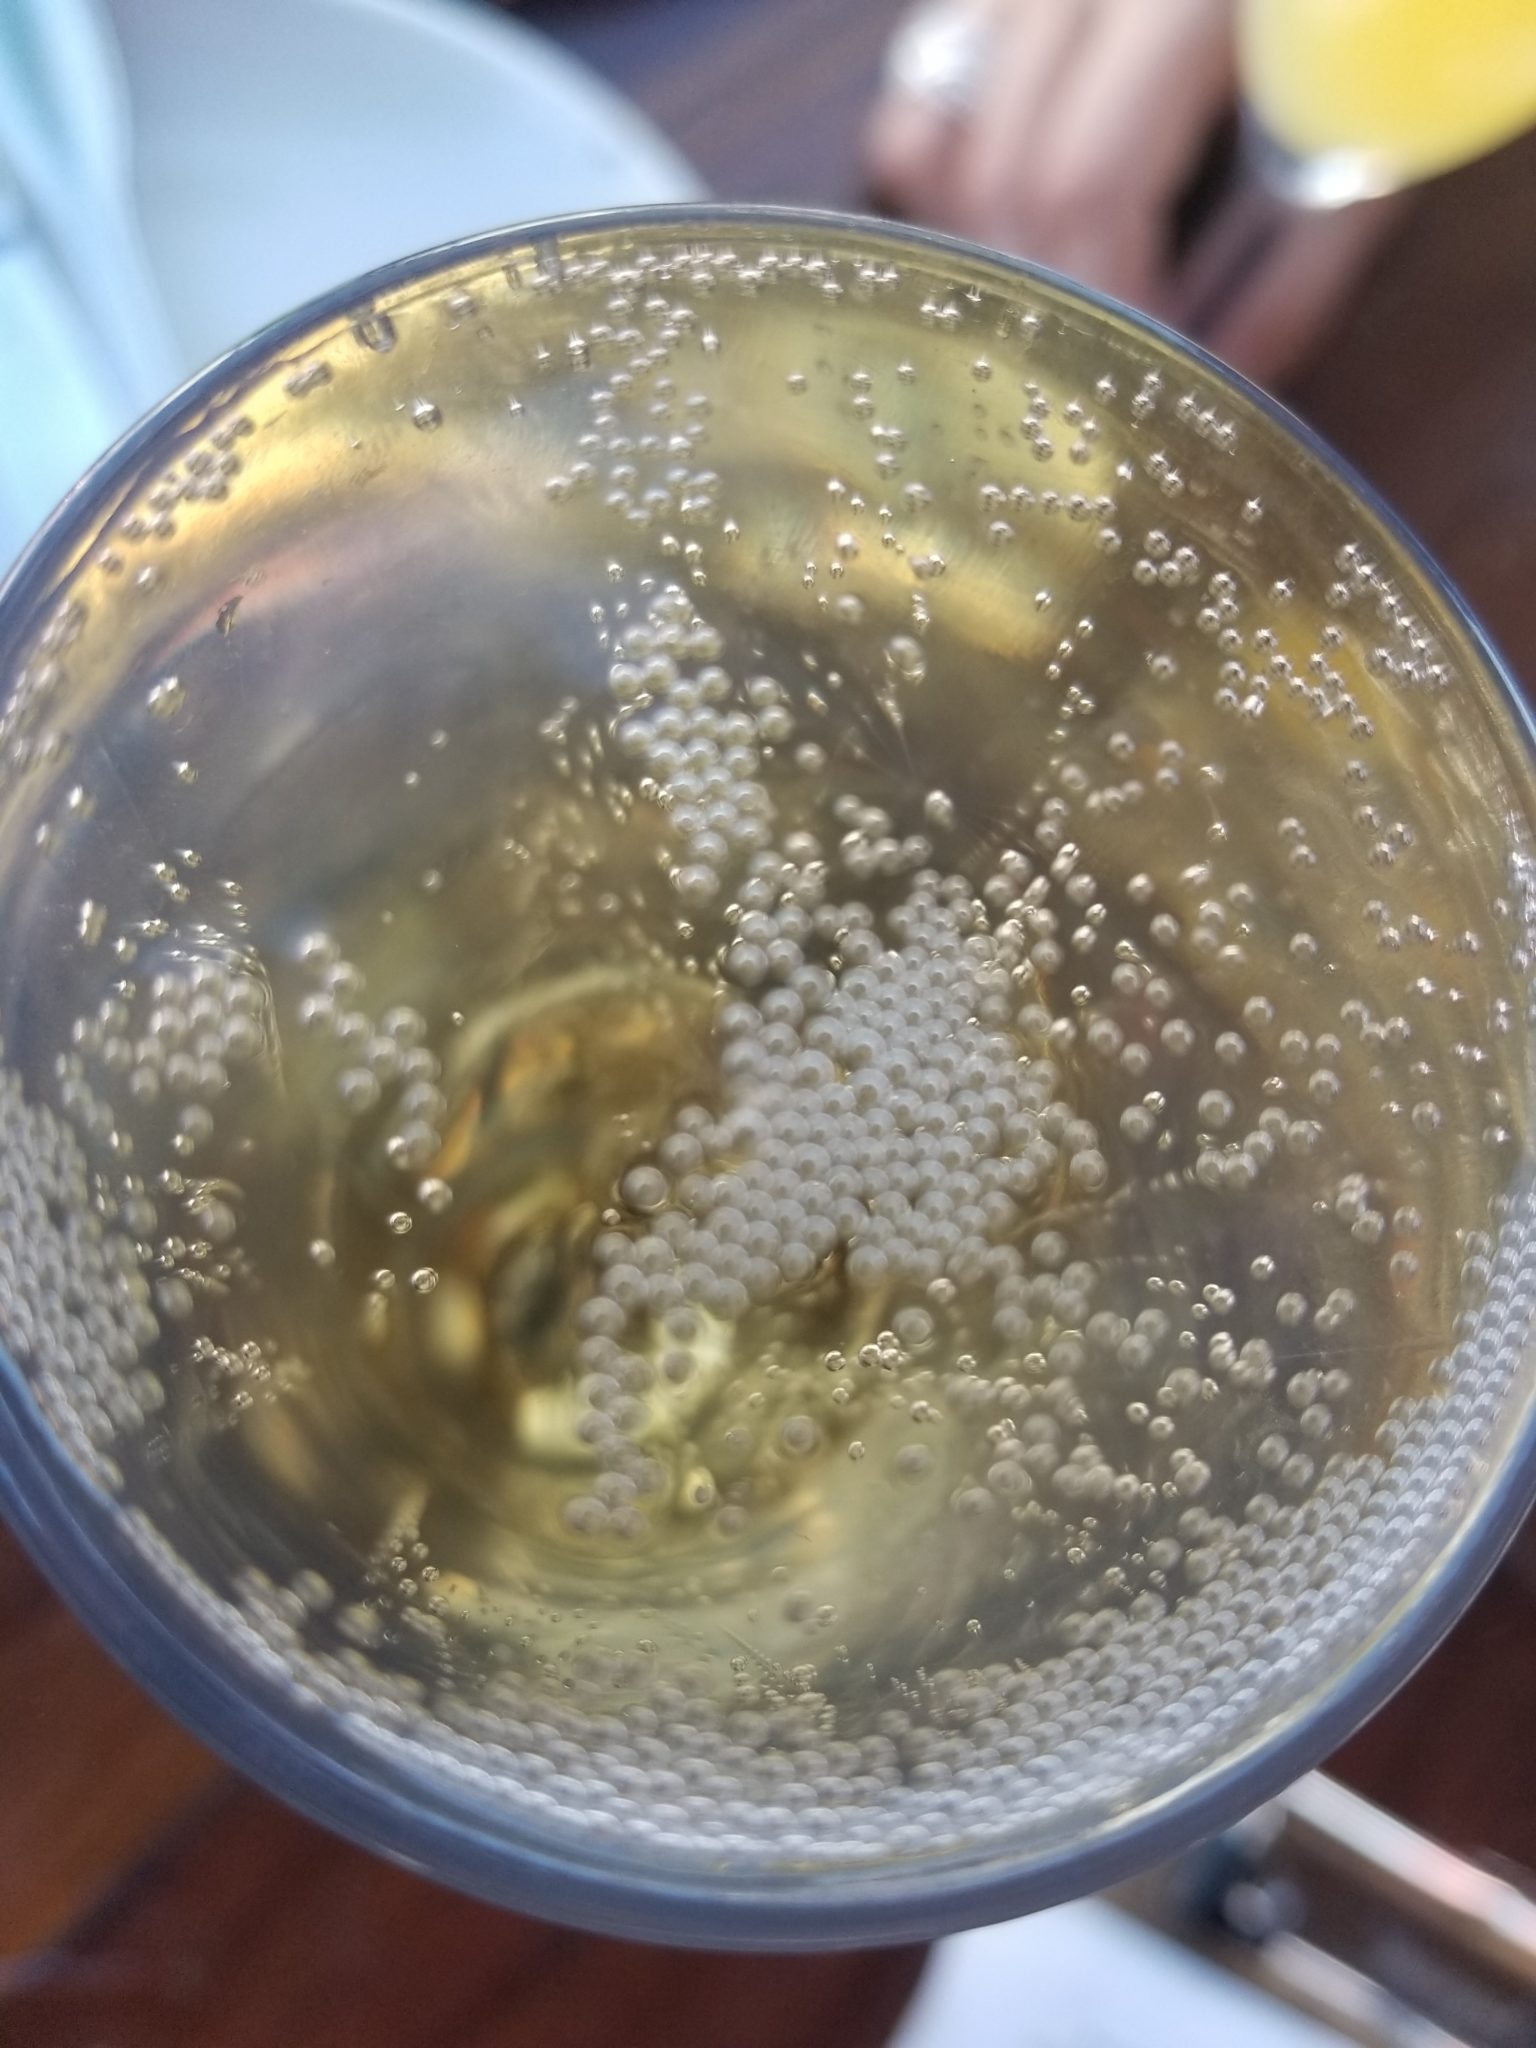 a glass of liquid with bubbles